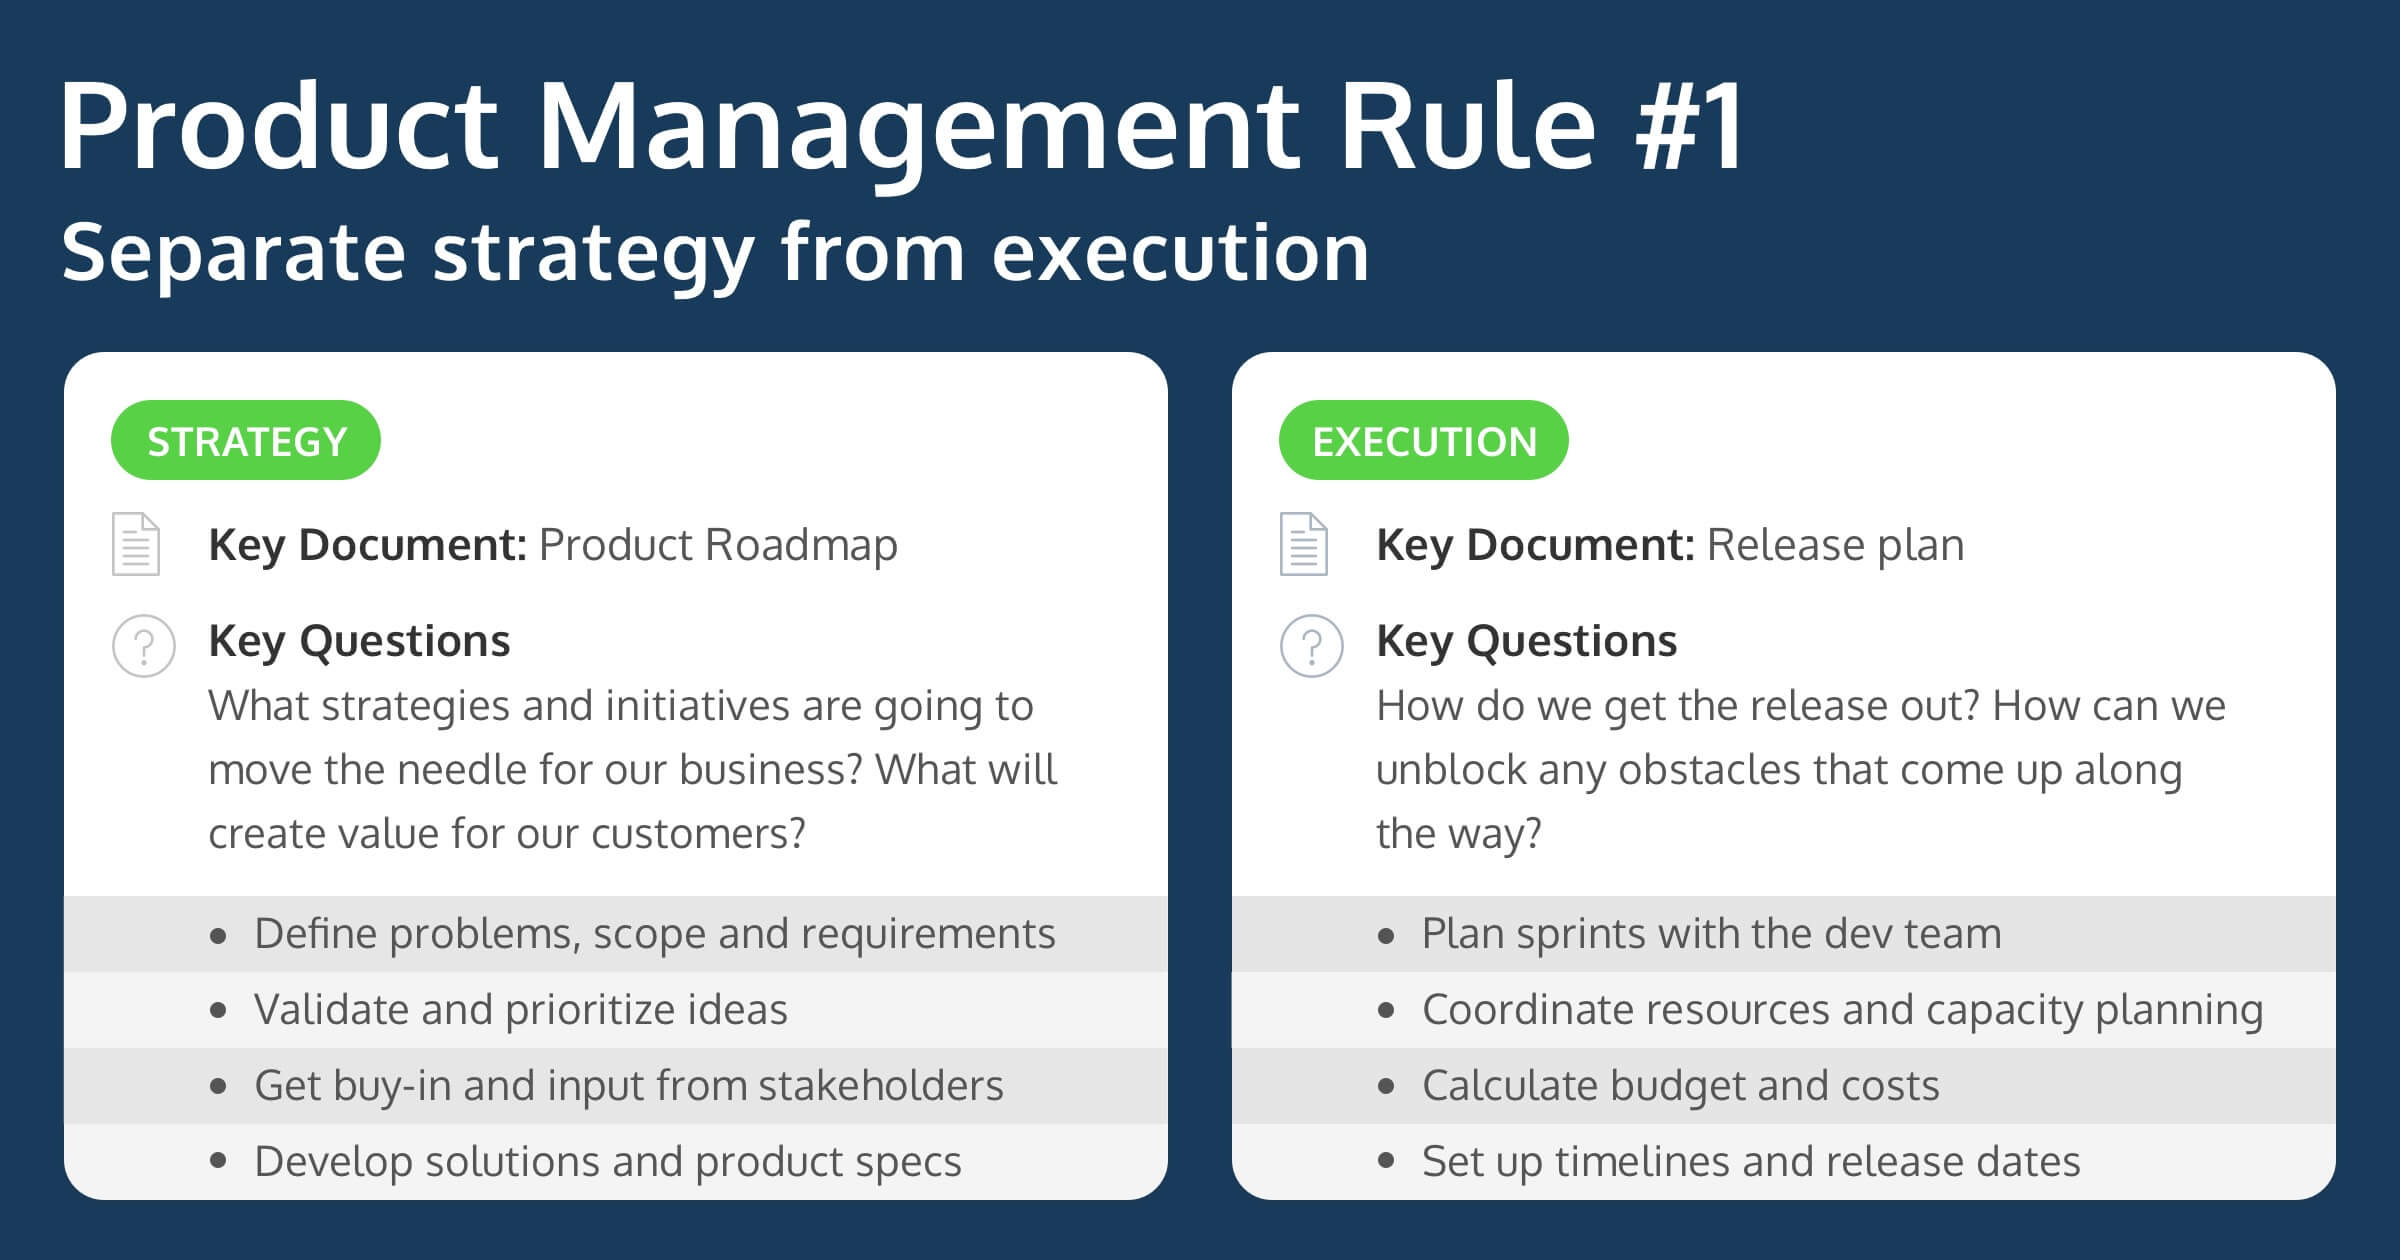 Product Management Rule number 1